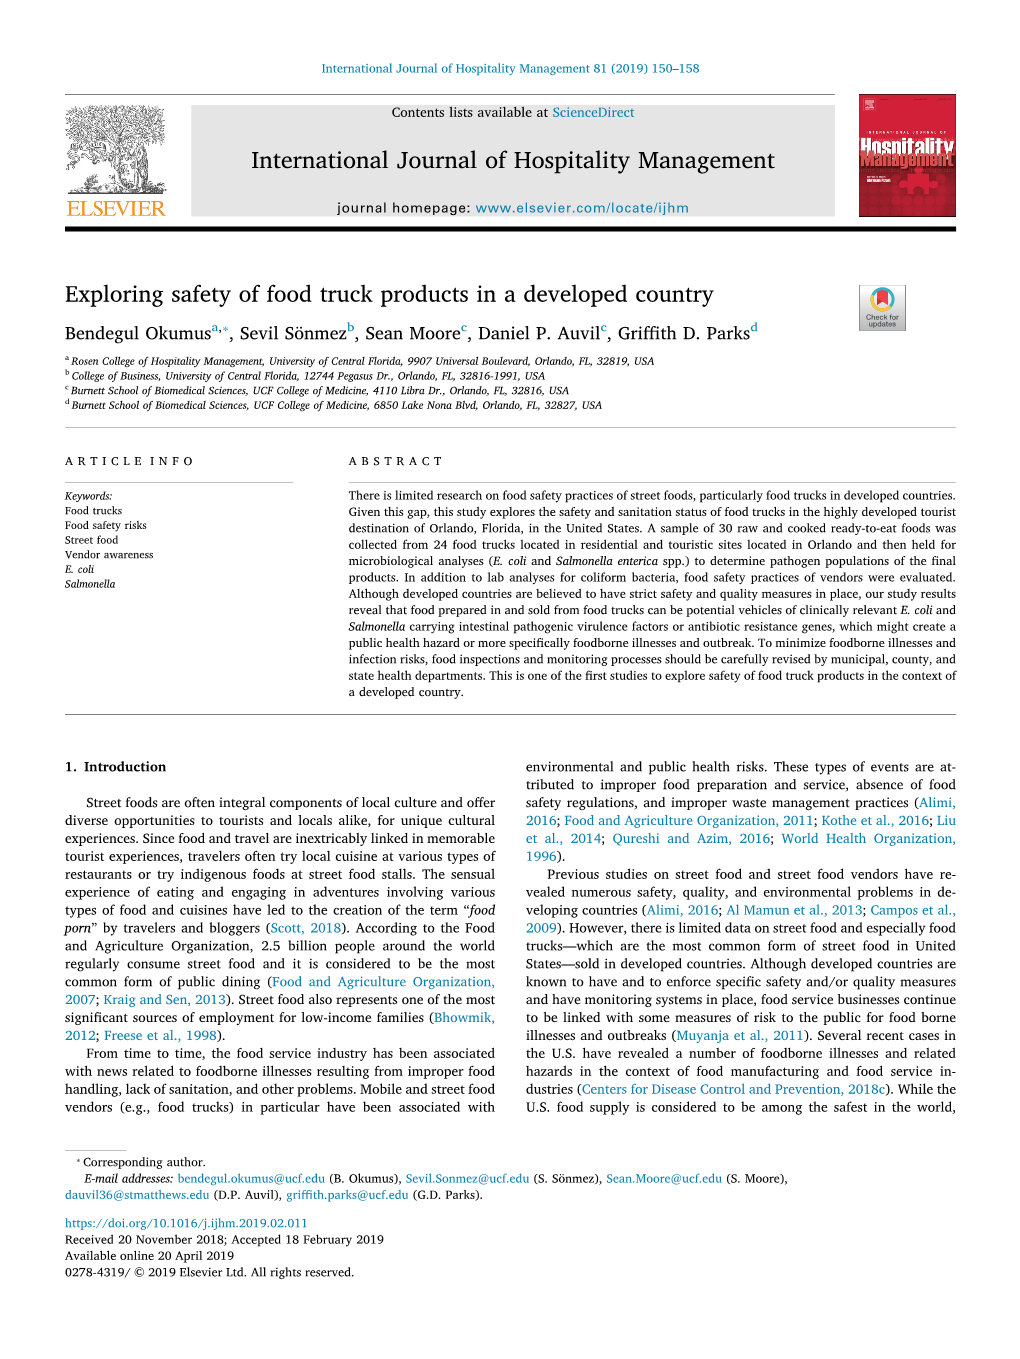 Exploring Safety of Food Truck Products in a Developed Country T ⁎ Bendegul Okumusa, , Sevil Sönmezb, Sean Moorec, Daniel P